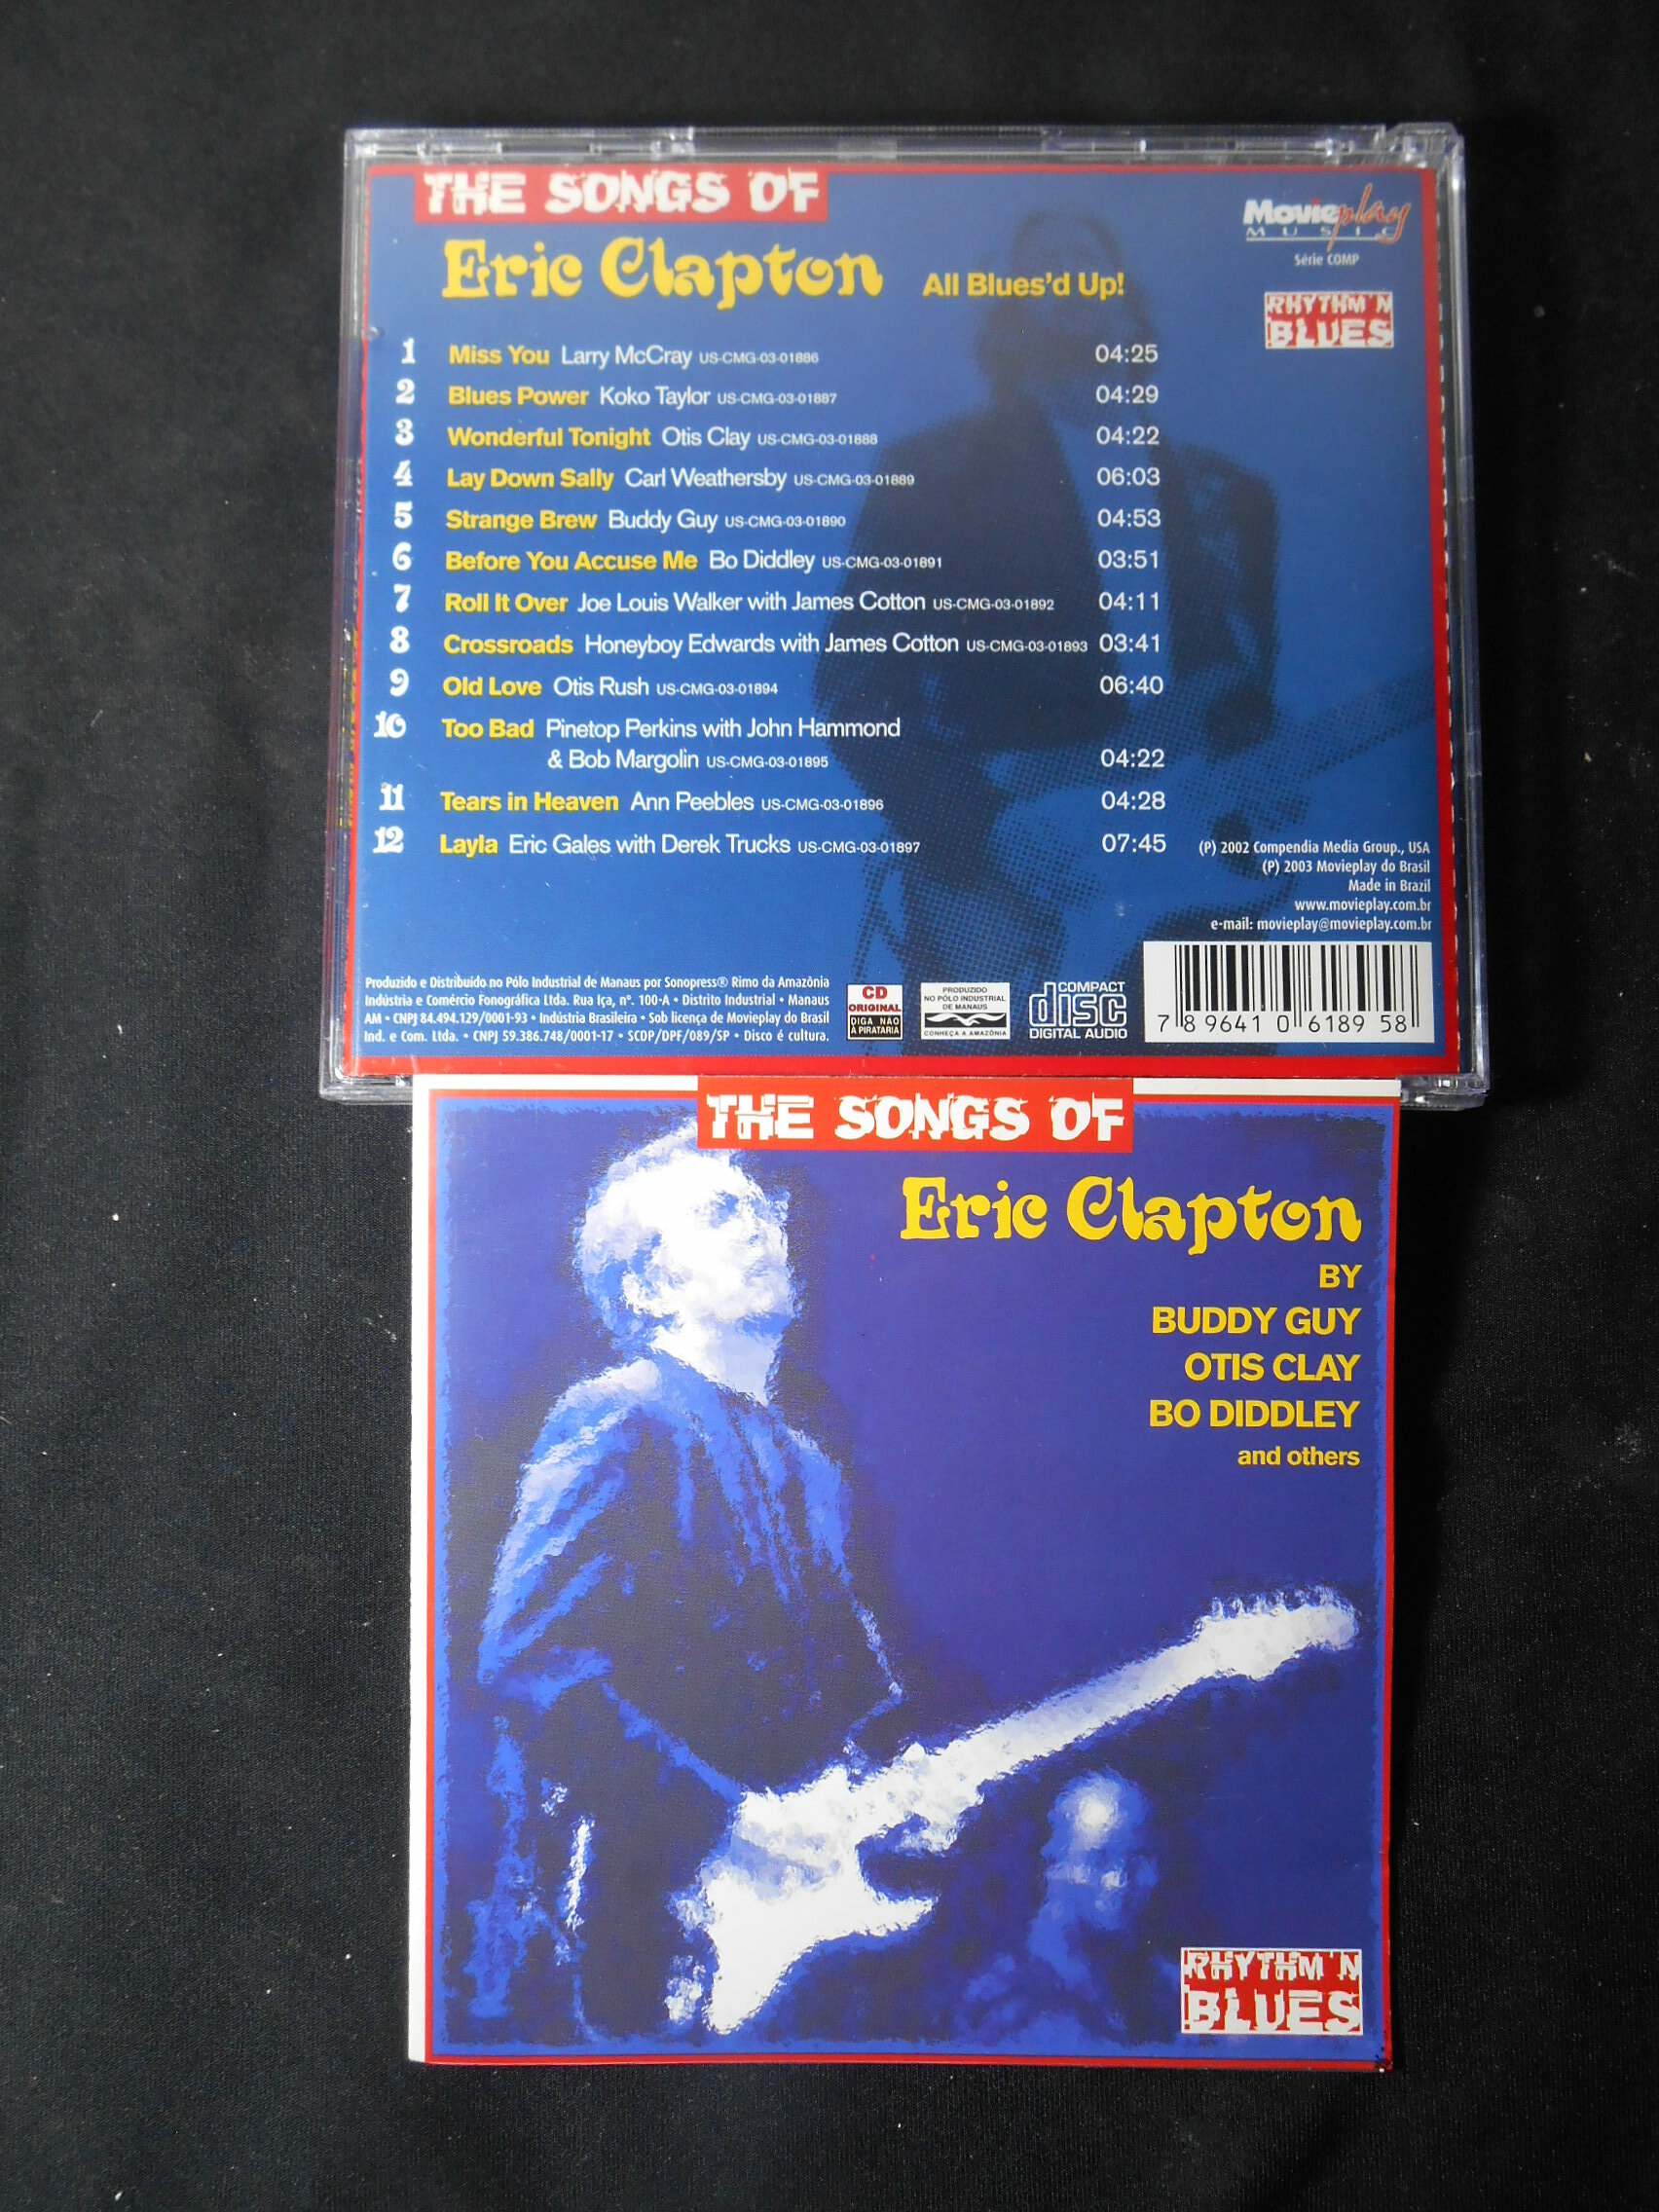 CD - Songs Of Eric Clapton - All Bluesd Up!